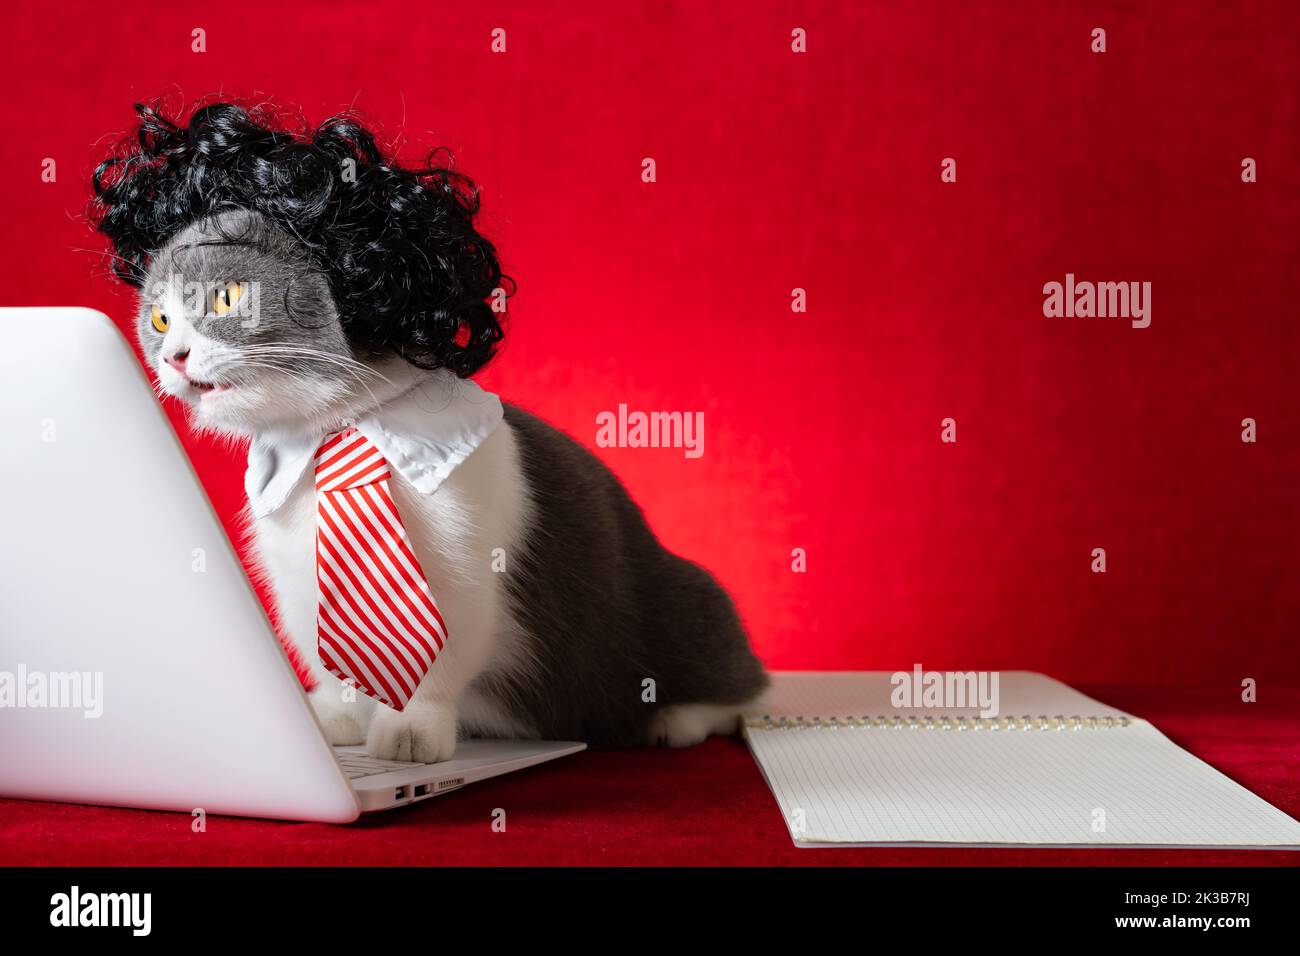 british shorthair cat with wig and tie like a business lady and working with a laptop with surperised expression Stock Photo